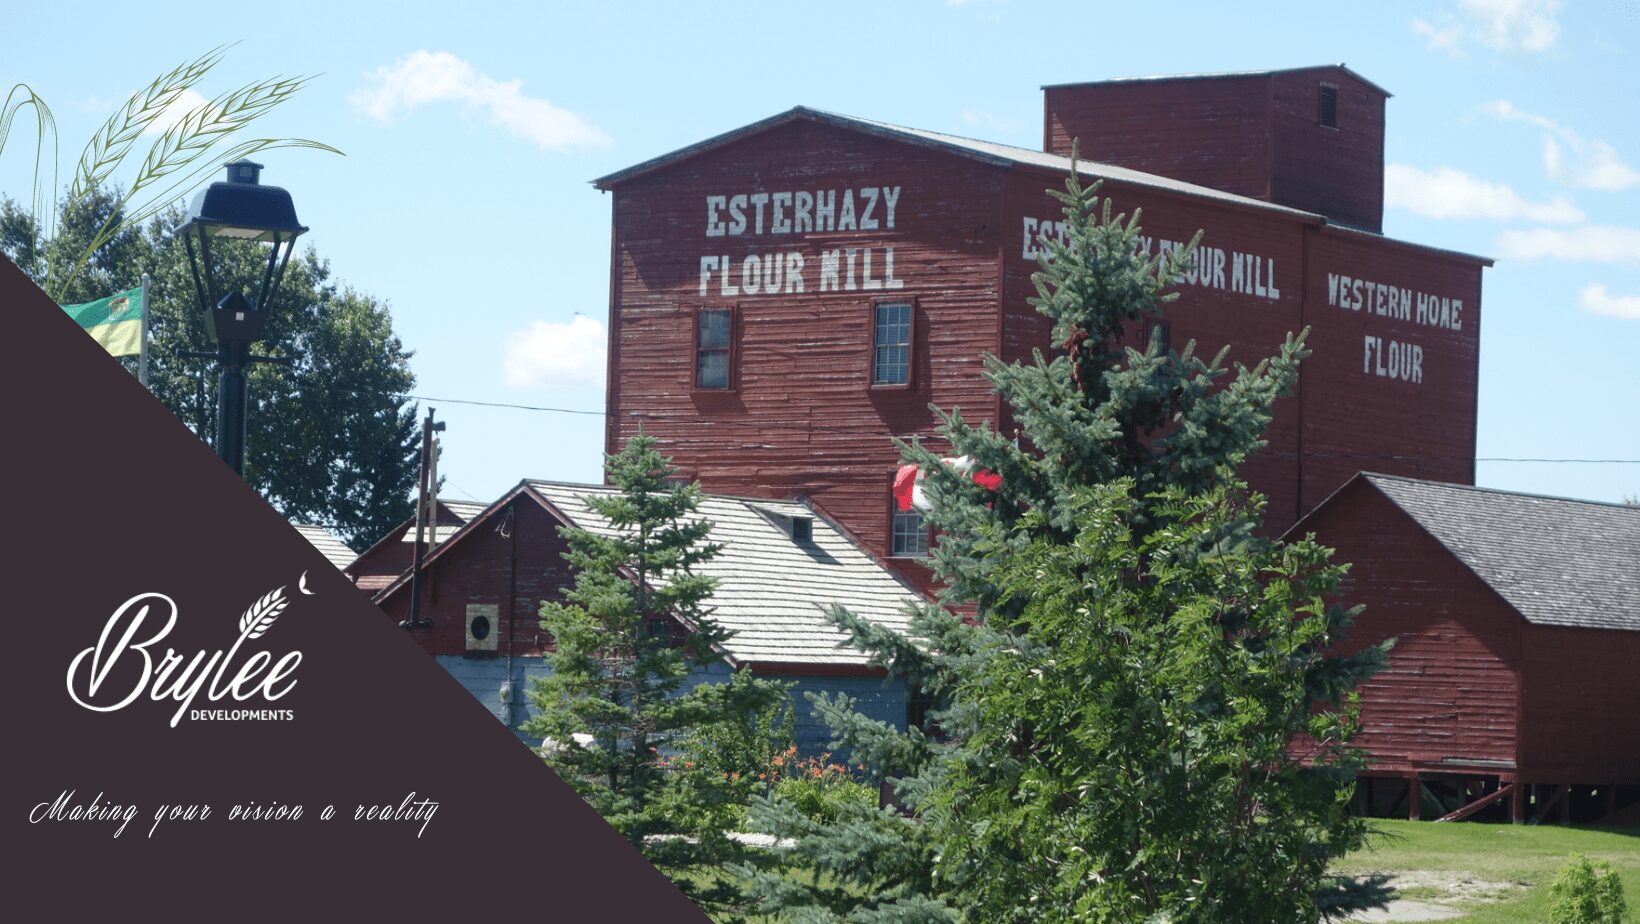 Things to do in Esterhazy Image